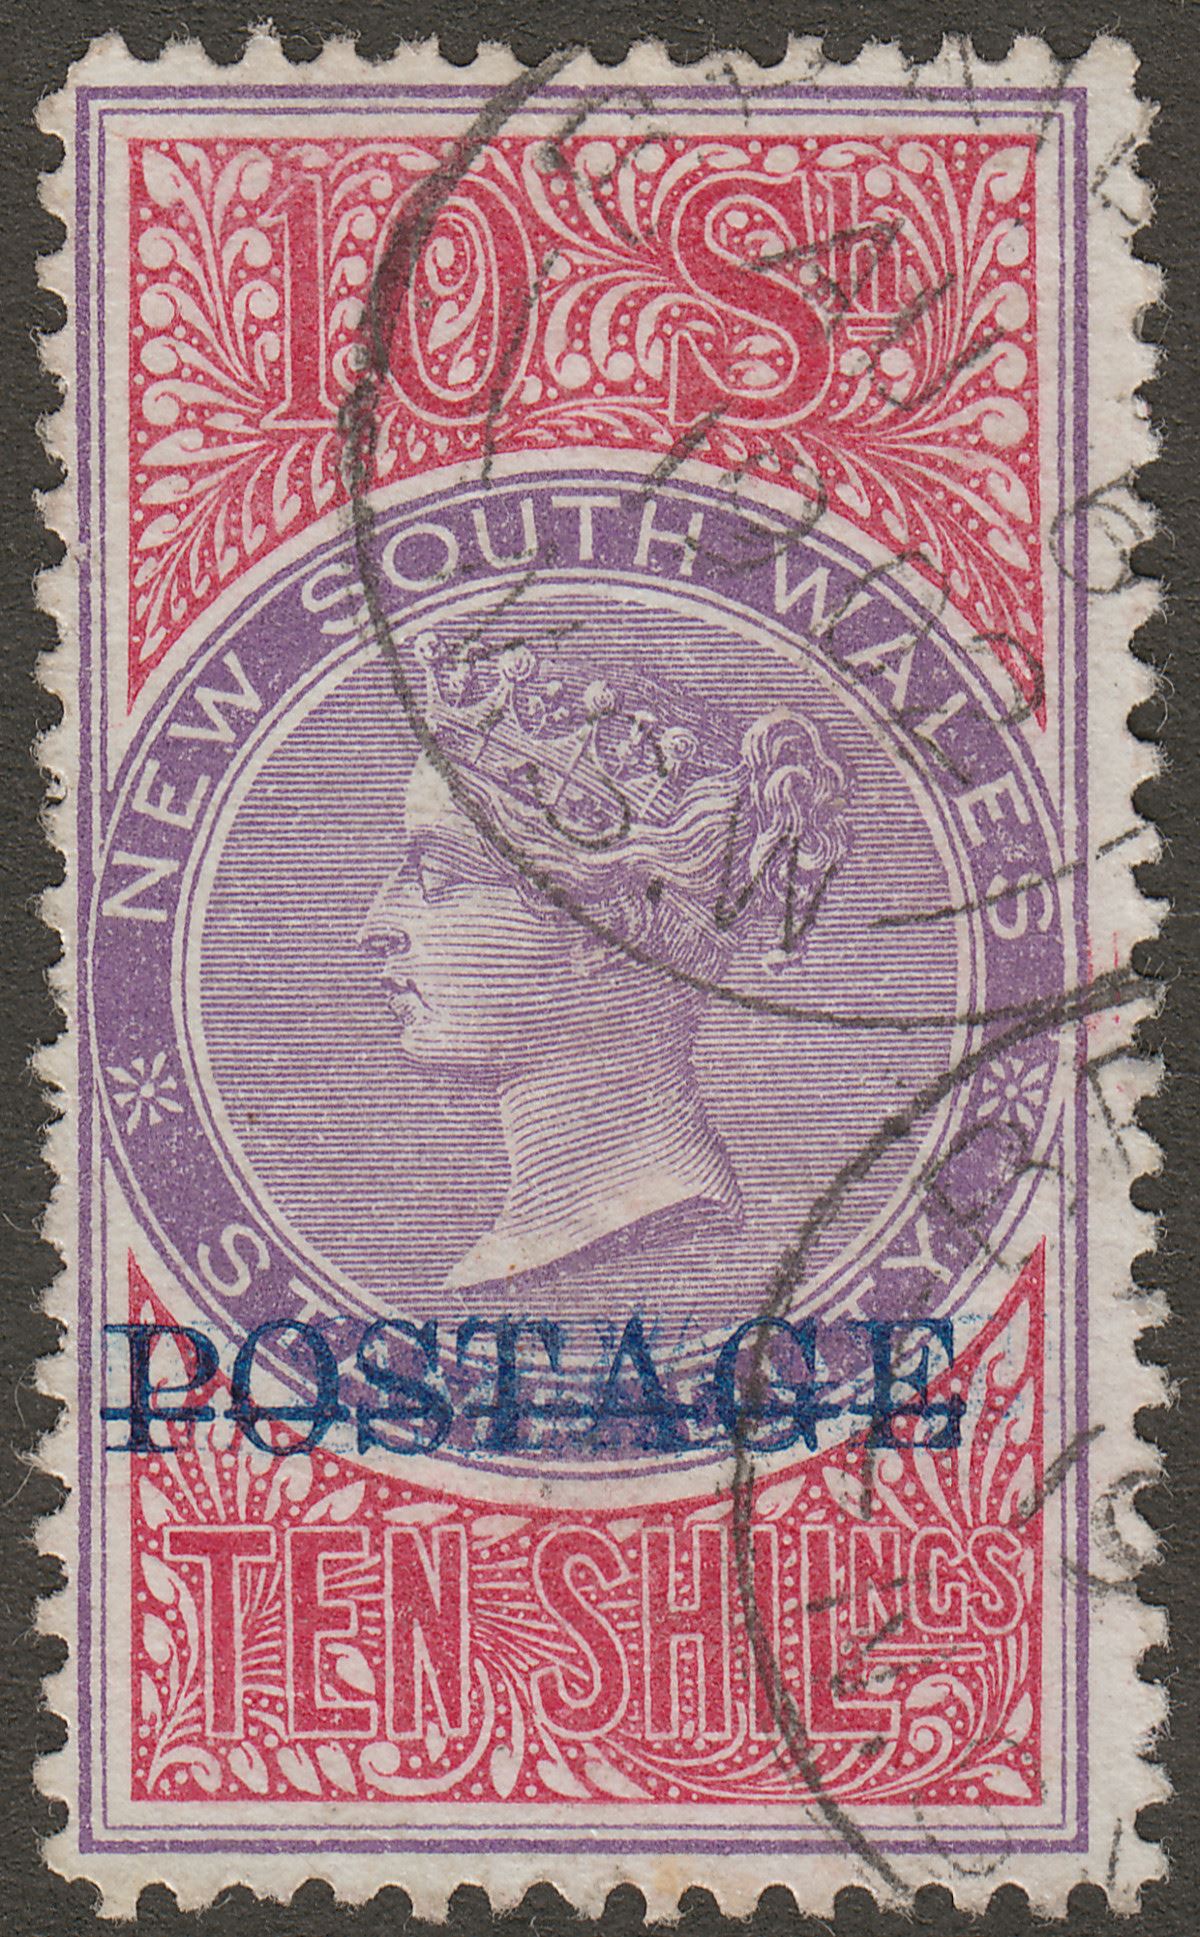 New South Wales 1894 QV Postage Opt 10sh Violet + Claret p12 Used SG275 cat £50